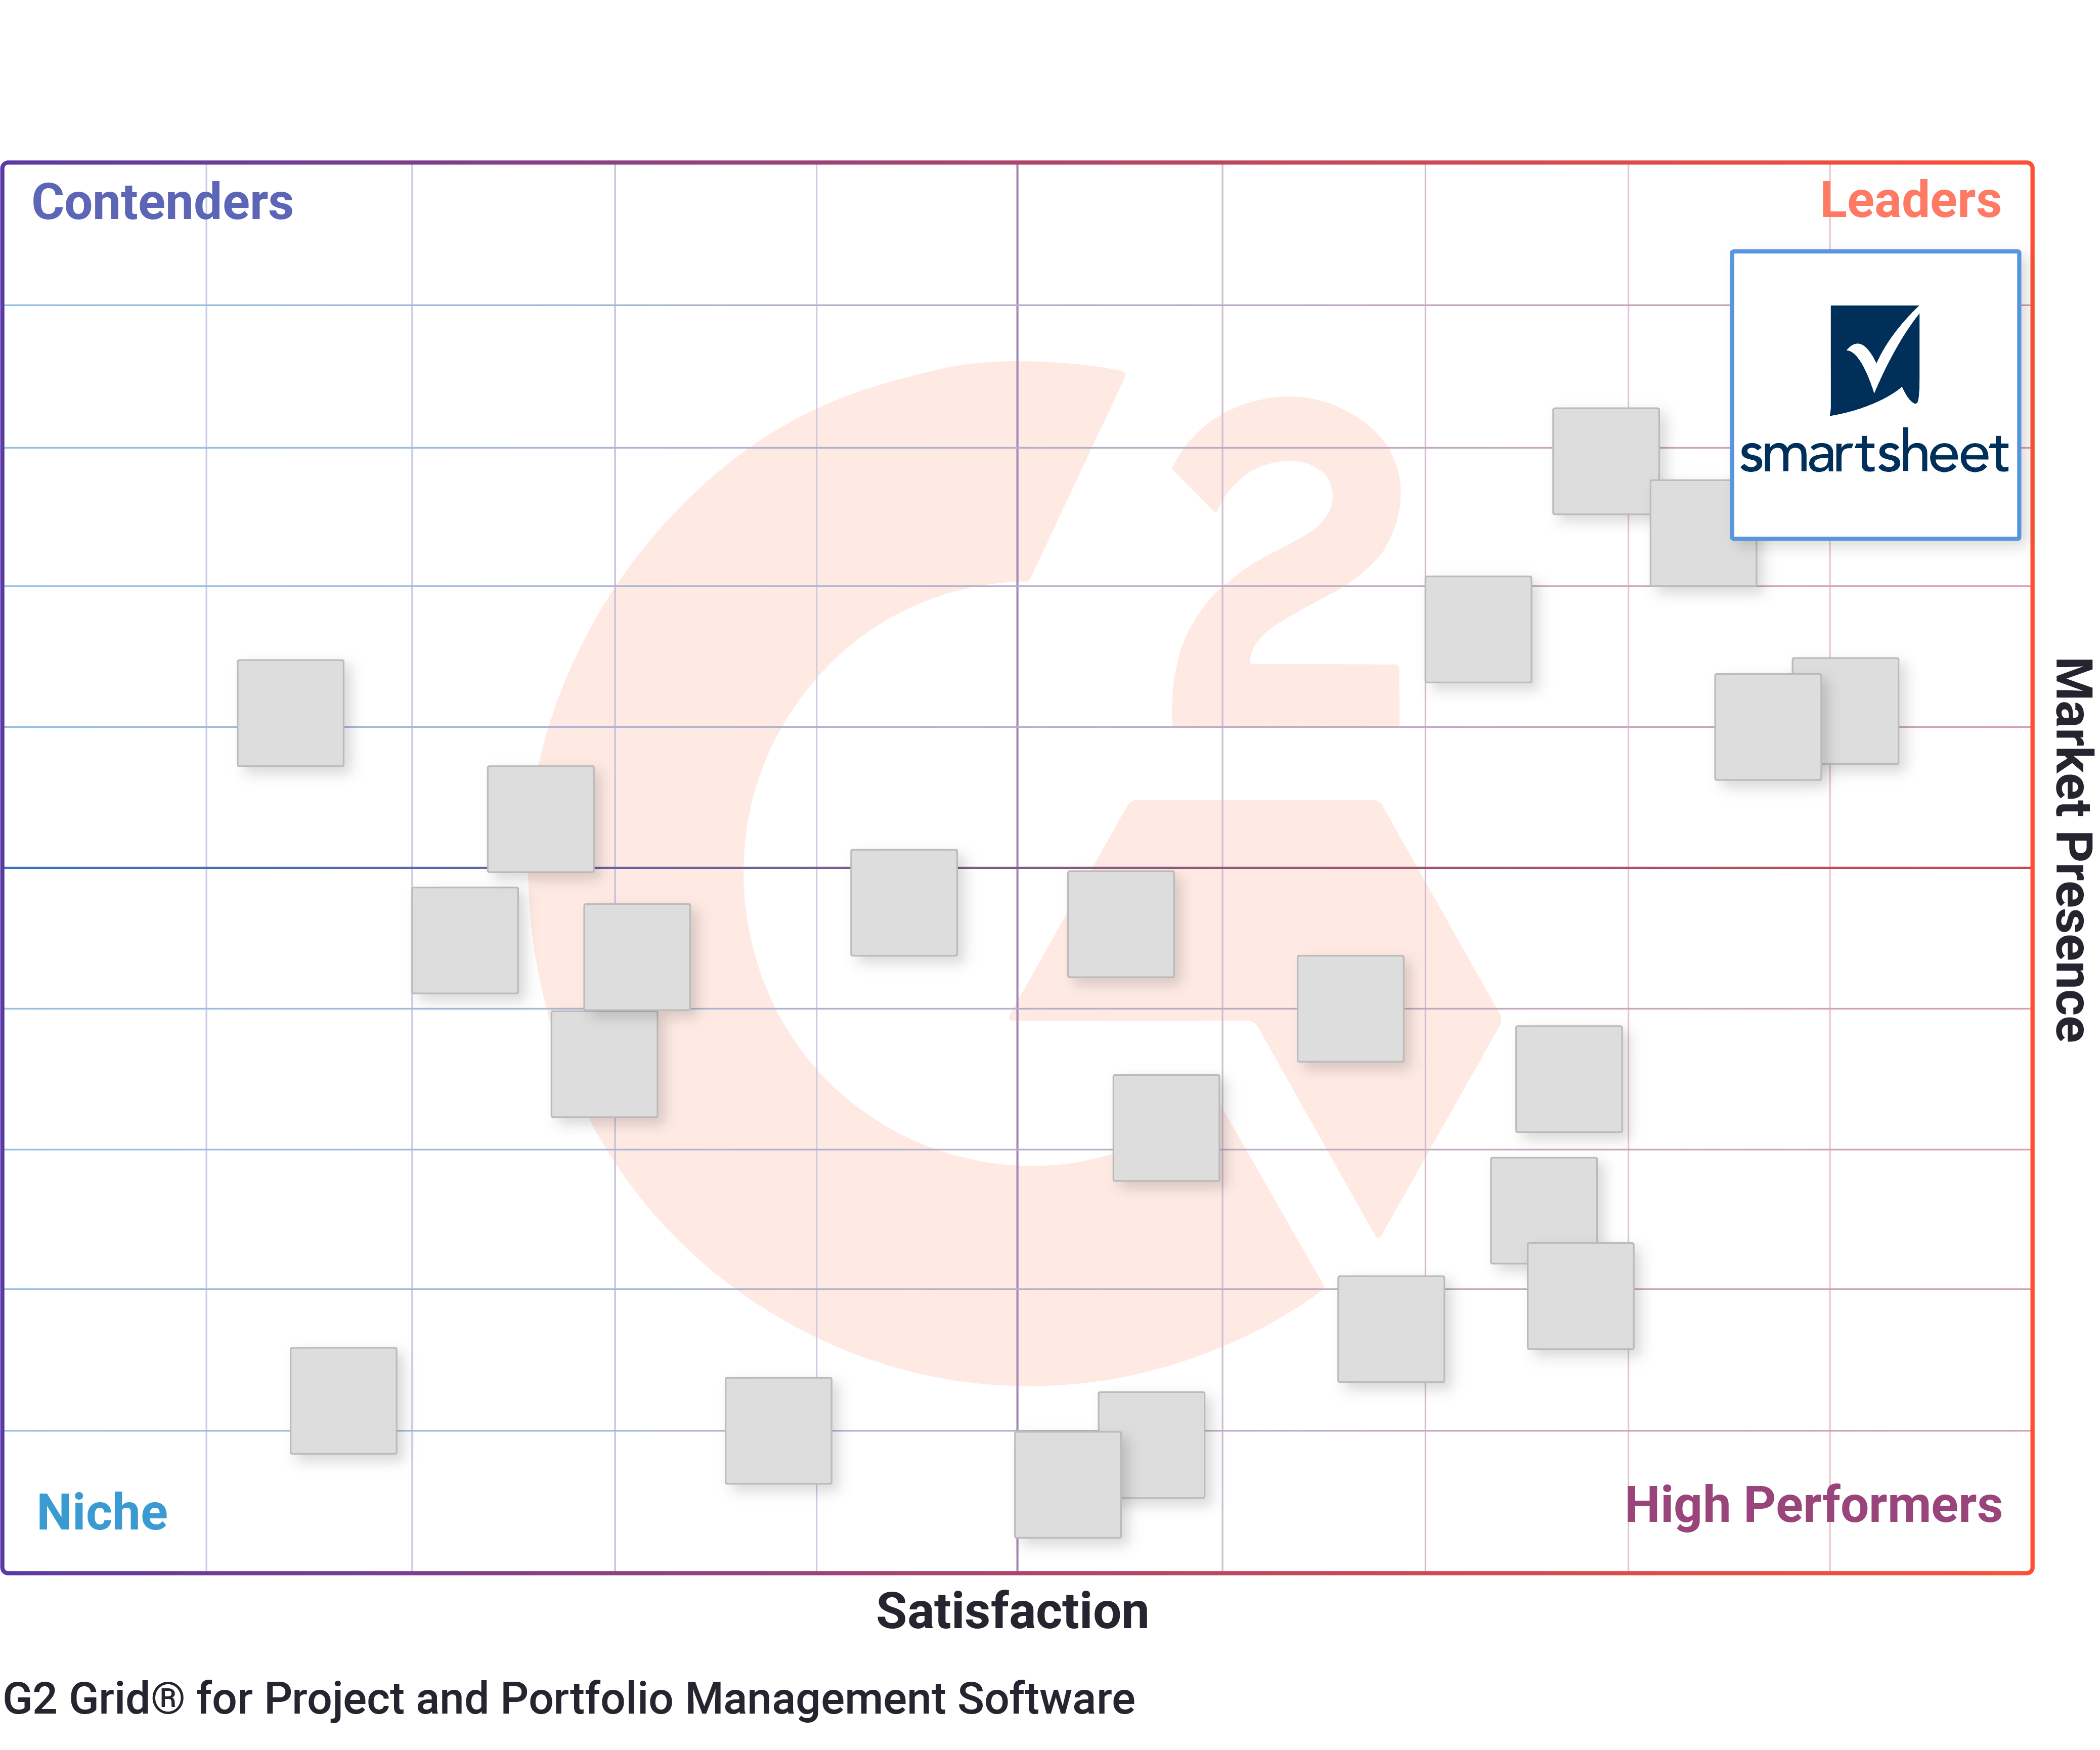 G2 Grid Report - PPM Software